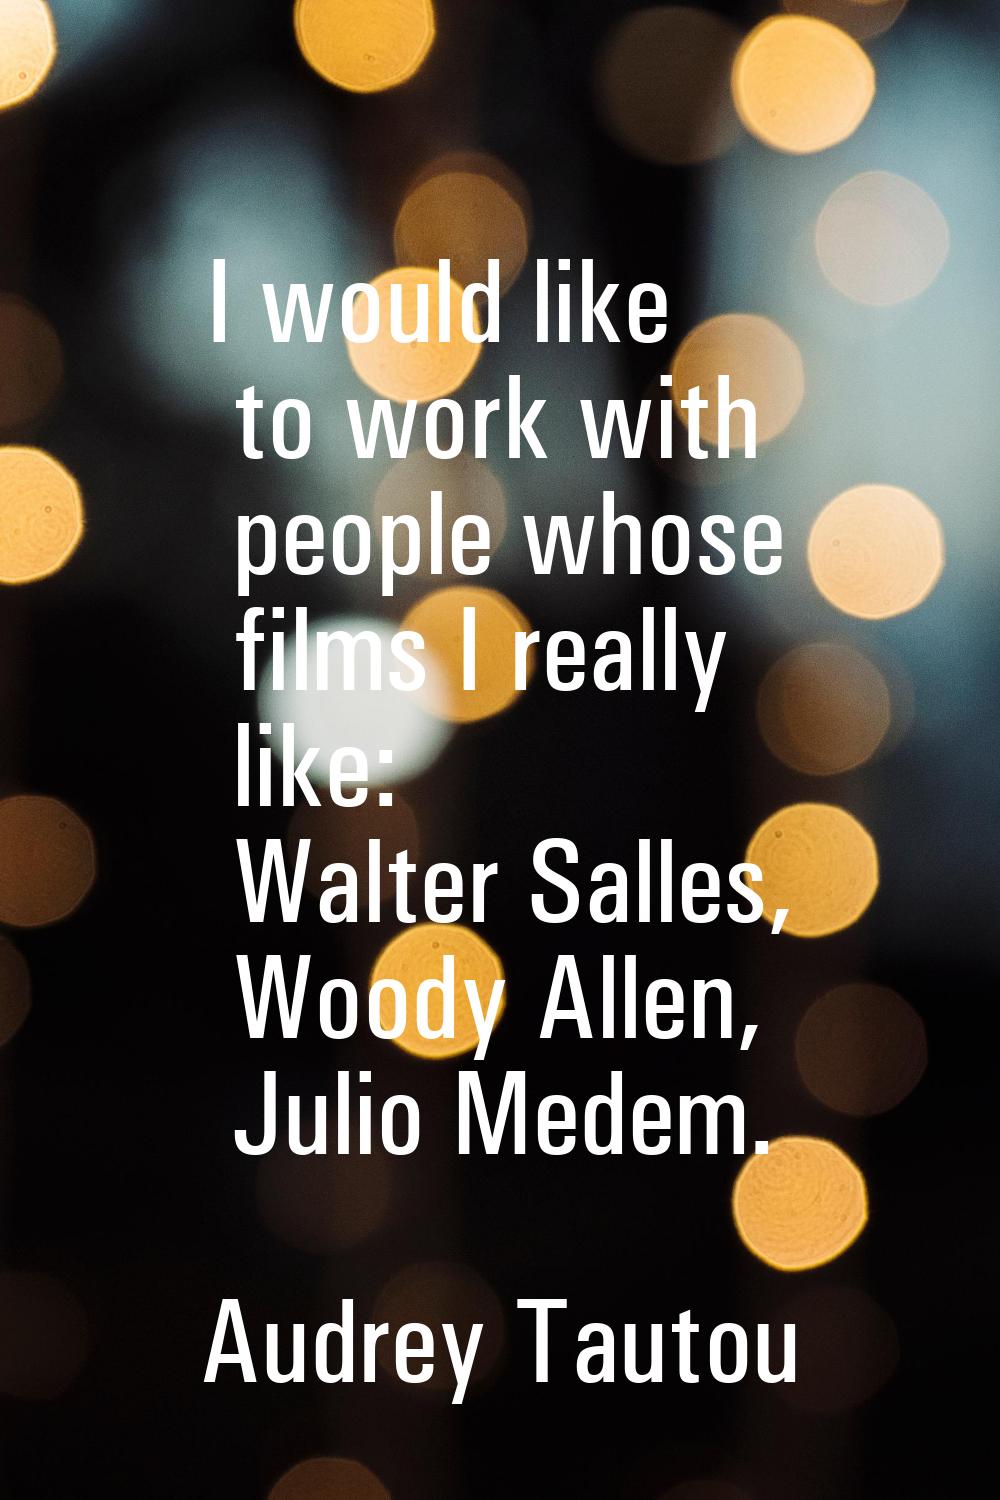 I would like to work with people whose films I really like: Walter Salles, Woody Allen, Julio Medem